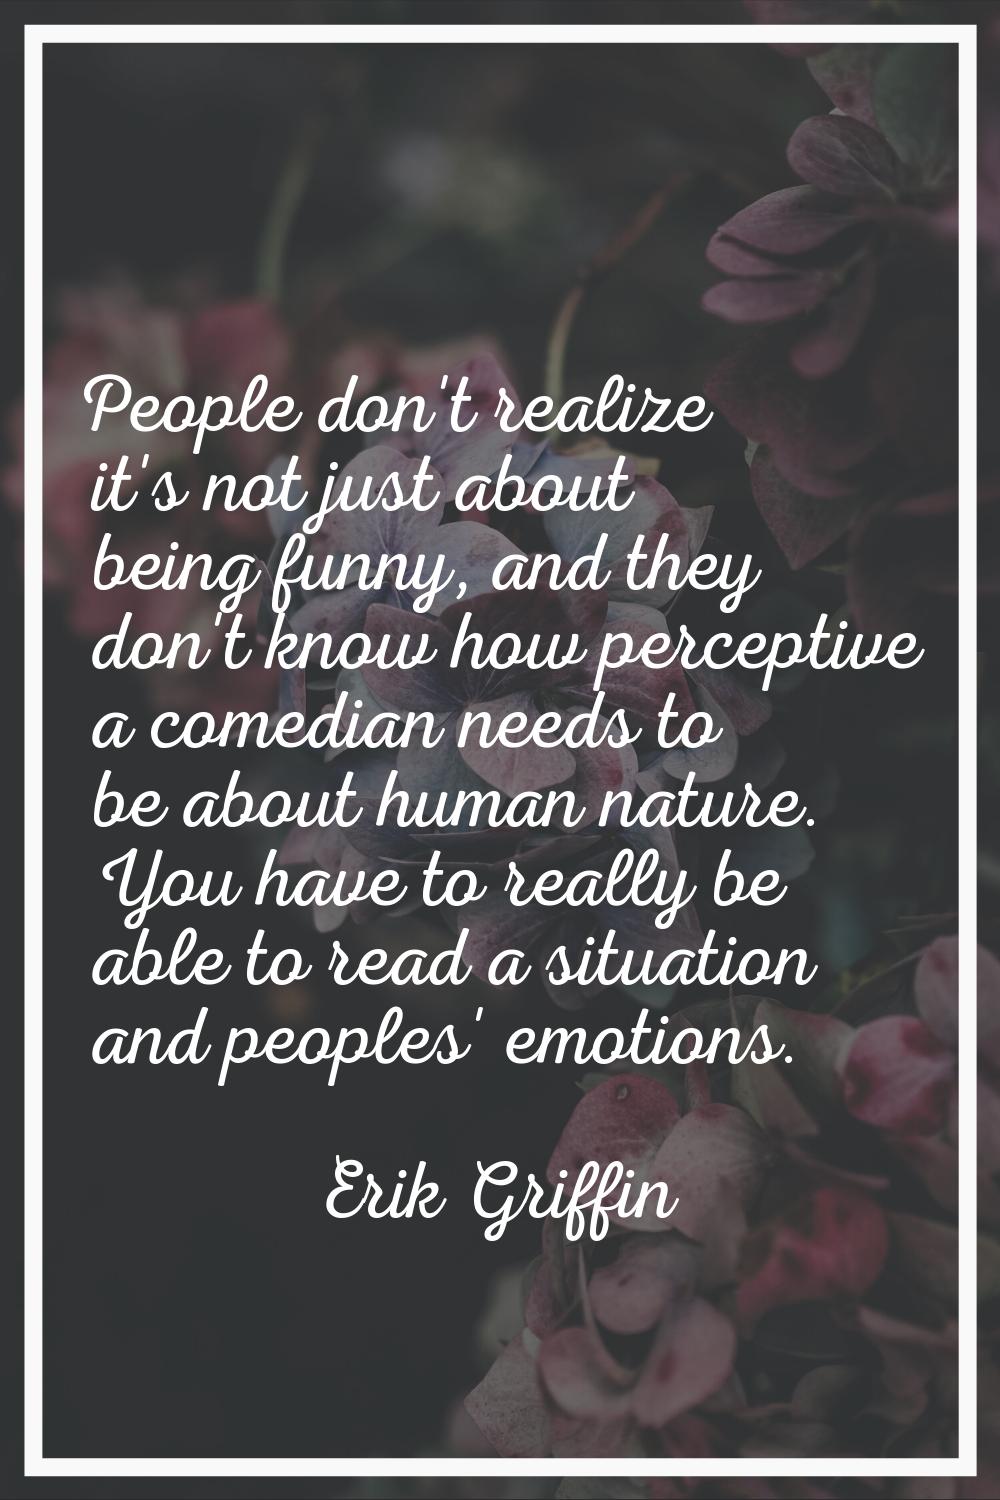 People don't realize it's not just about being funny, and they don't know how perceptive a comedian